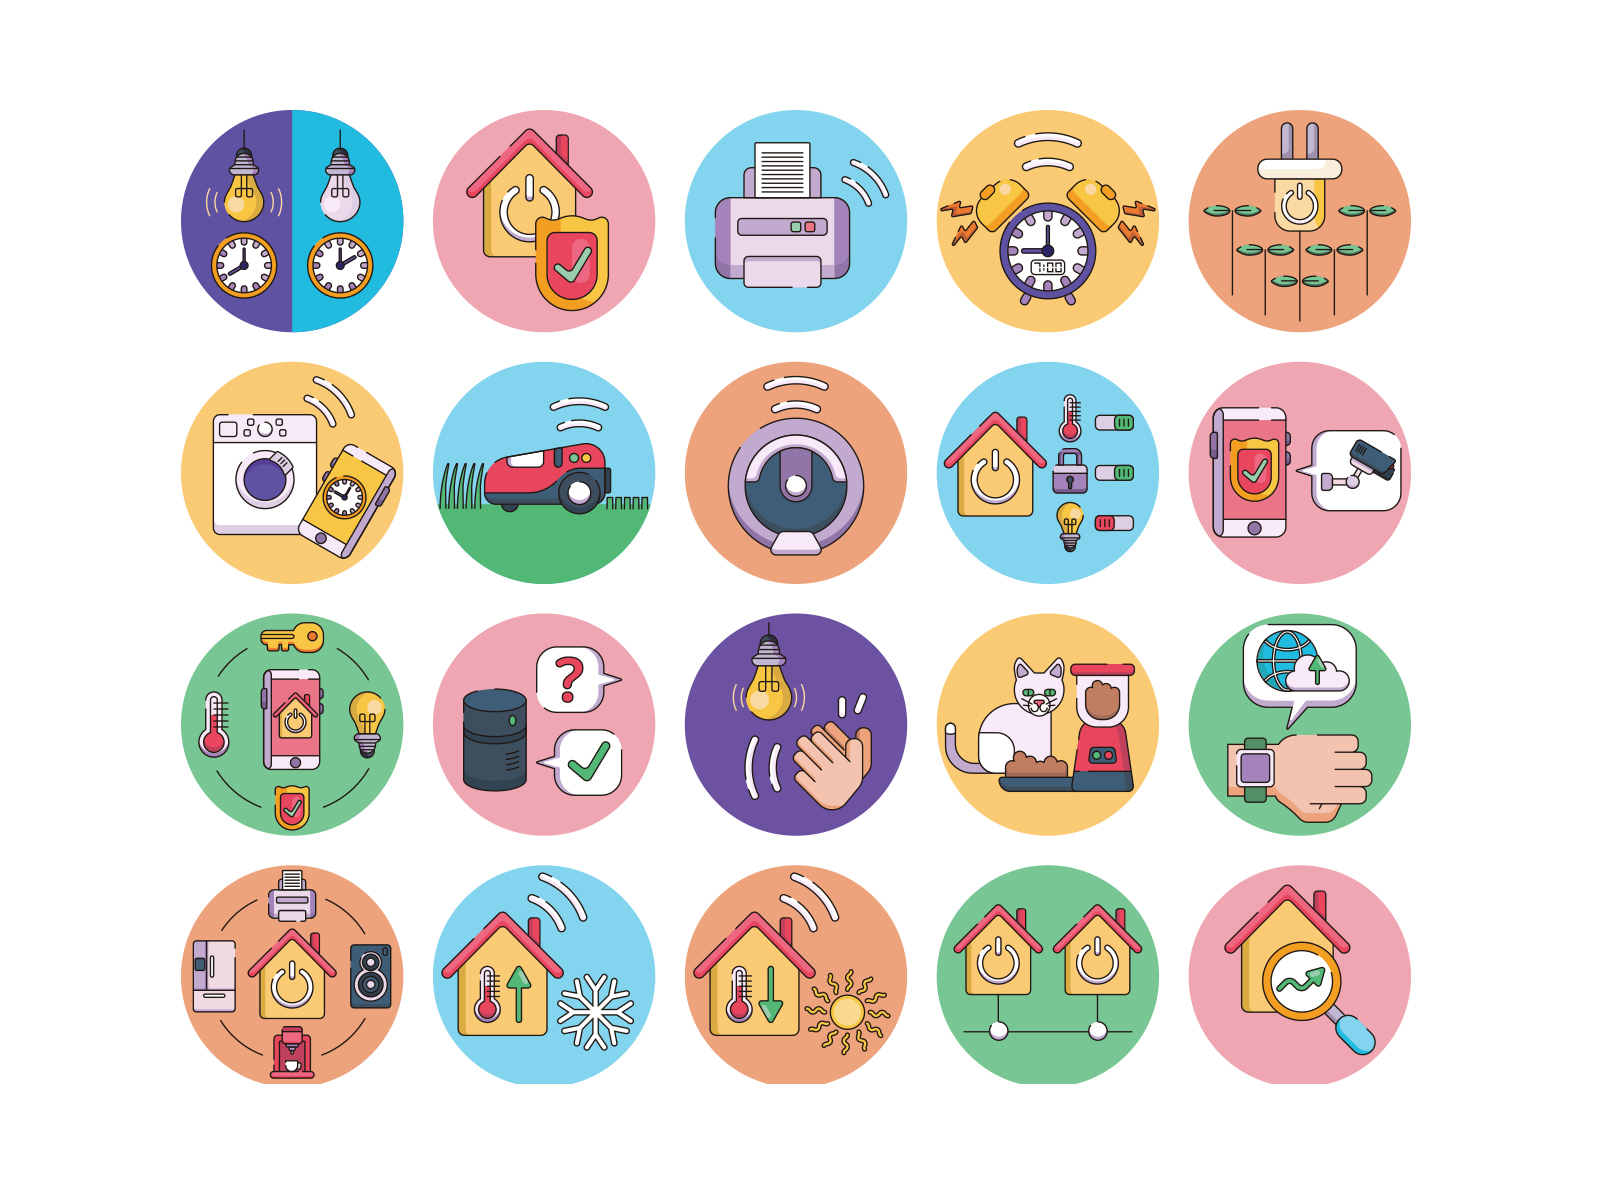 Iot smart devices icons iconset illustrations internet of things network smart clock smart lightning smart temperature technology vectors voice controller